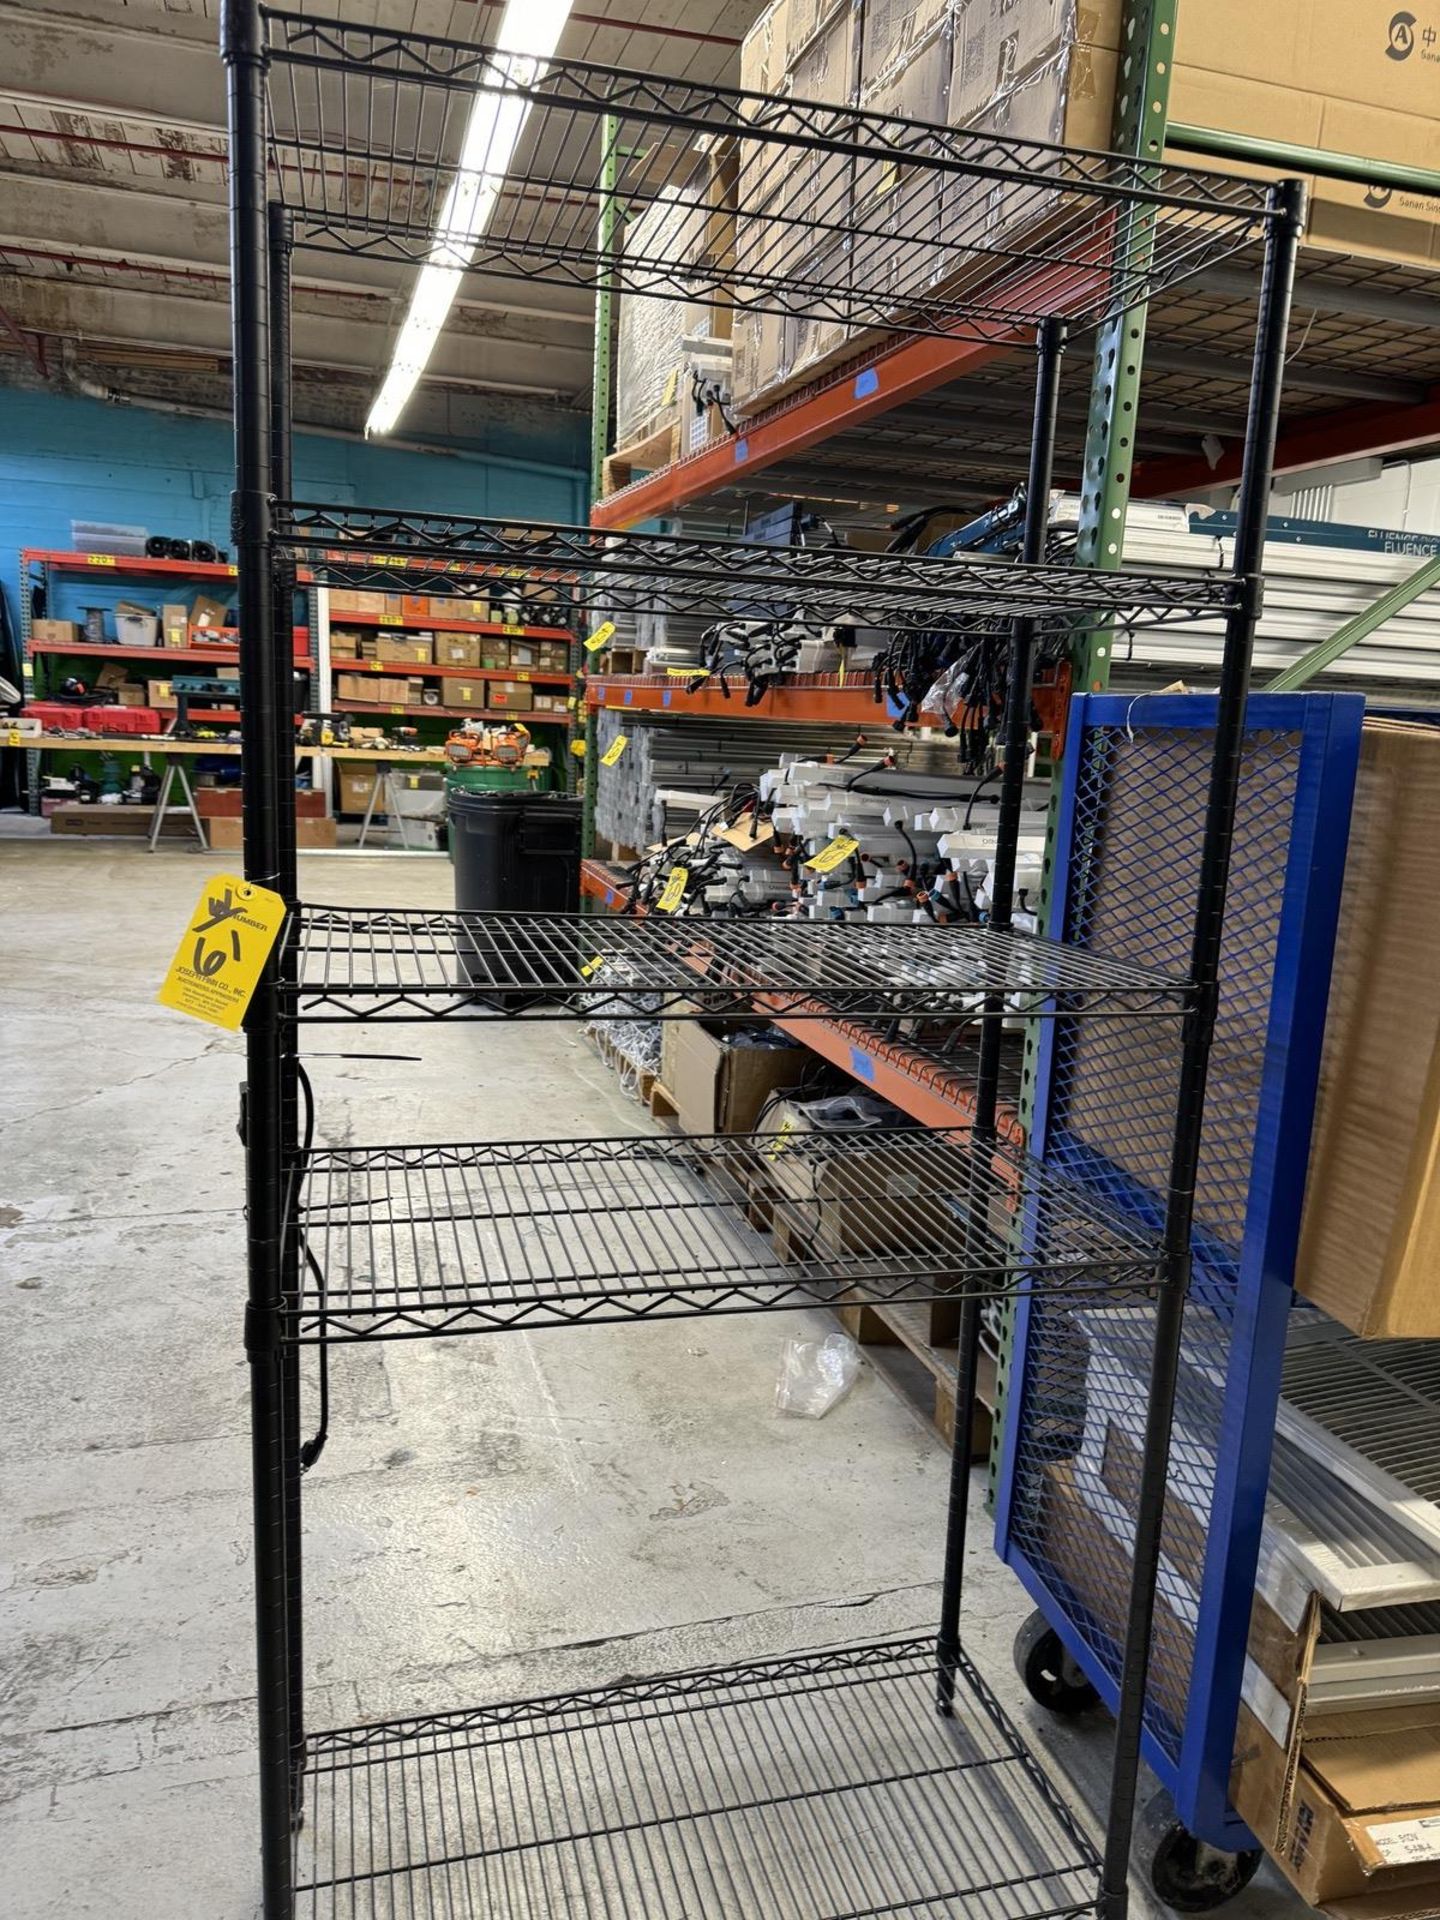 Lot Blue Port. 2 Shelf Cart with Vent Covers, Plastic Trays, Filters, Etc. - Image 3 of 4